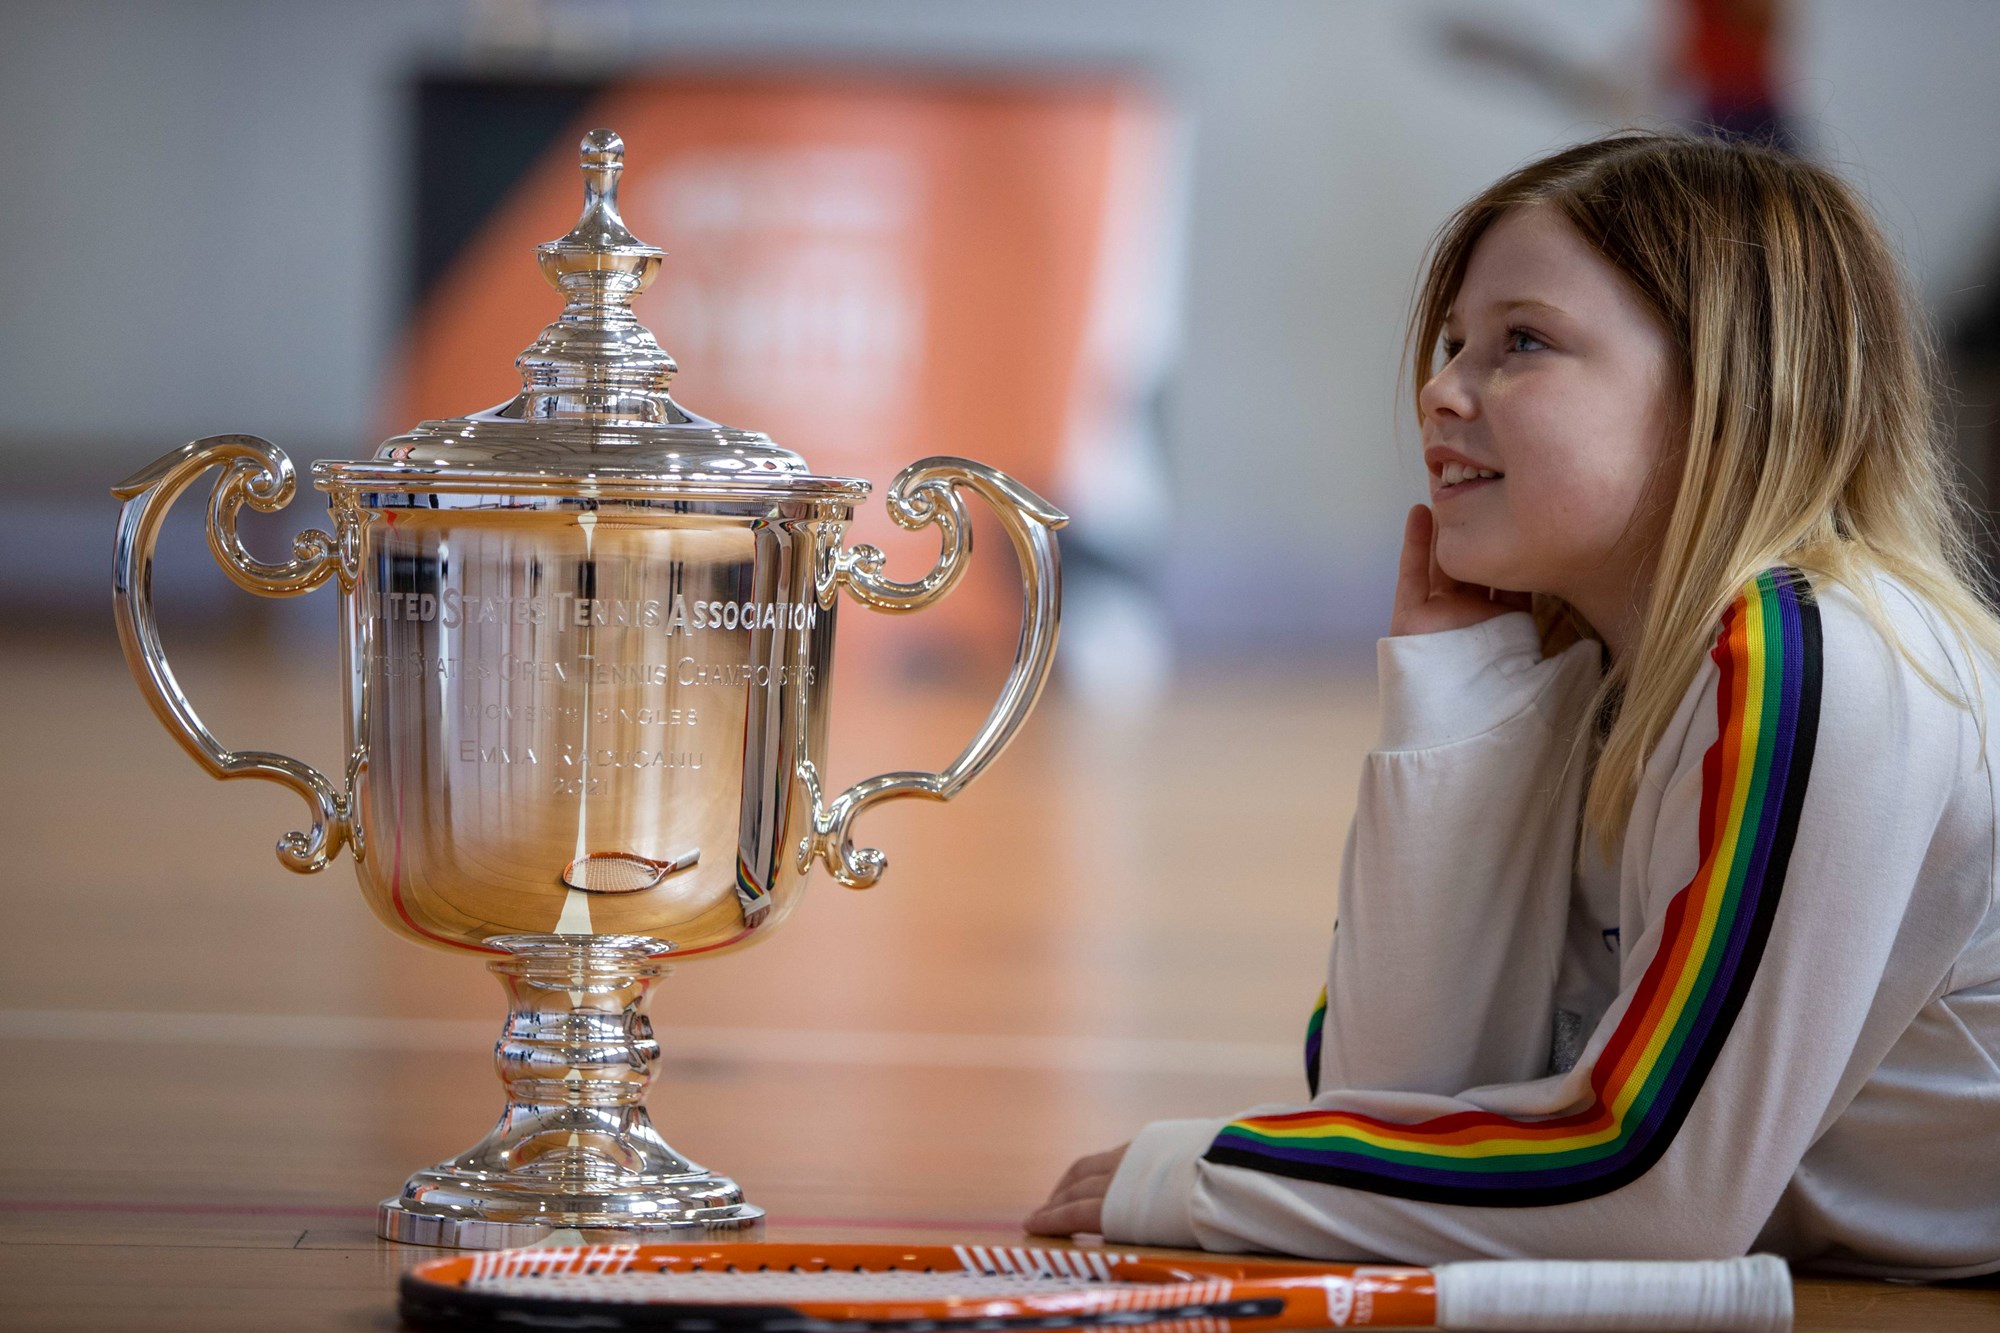 A pupil from Broughton Primary School, Edinburgh posing with Emma Raducanu's US Open Trophy